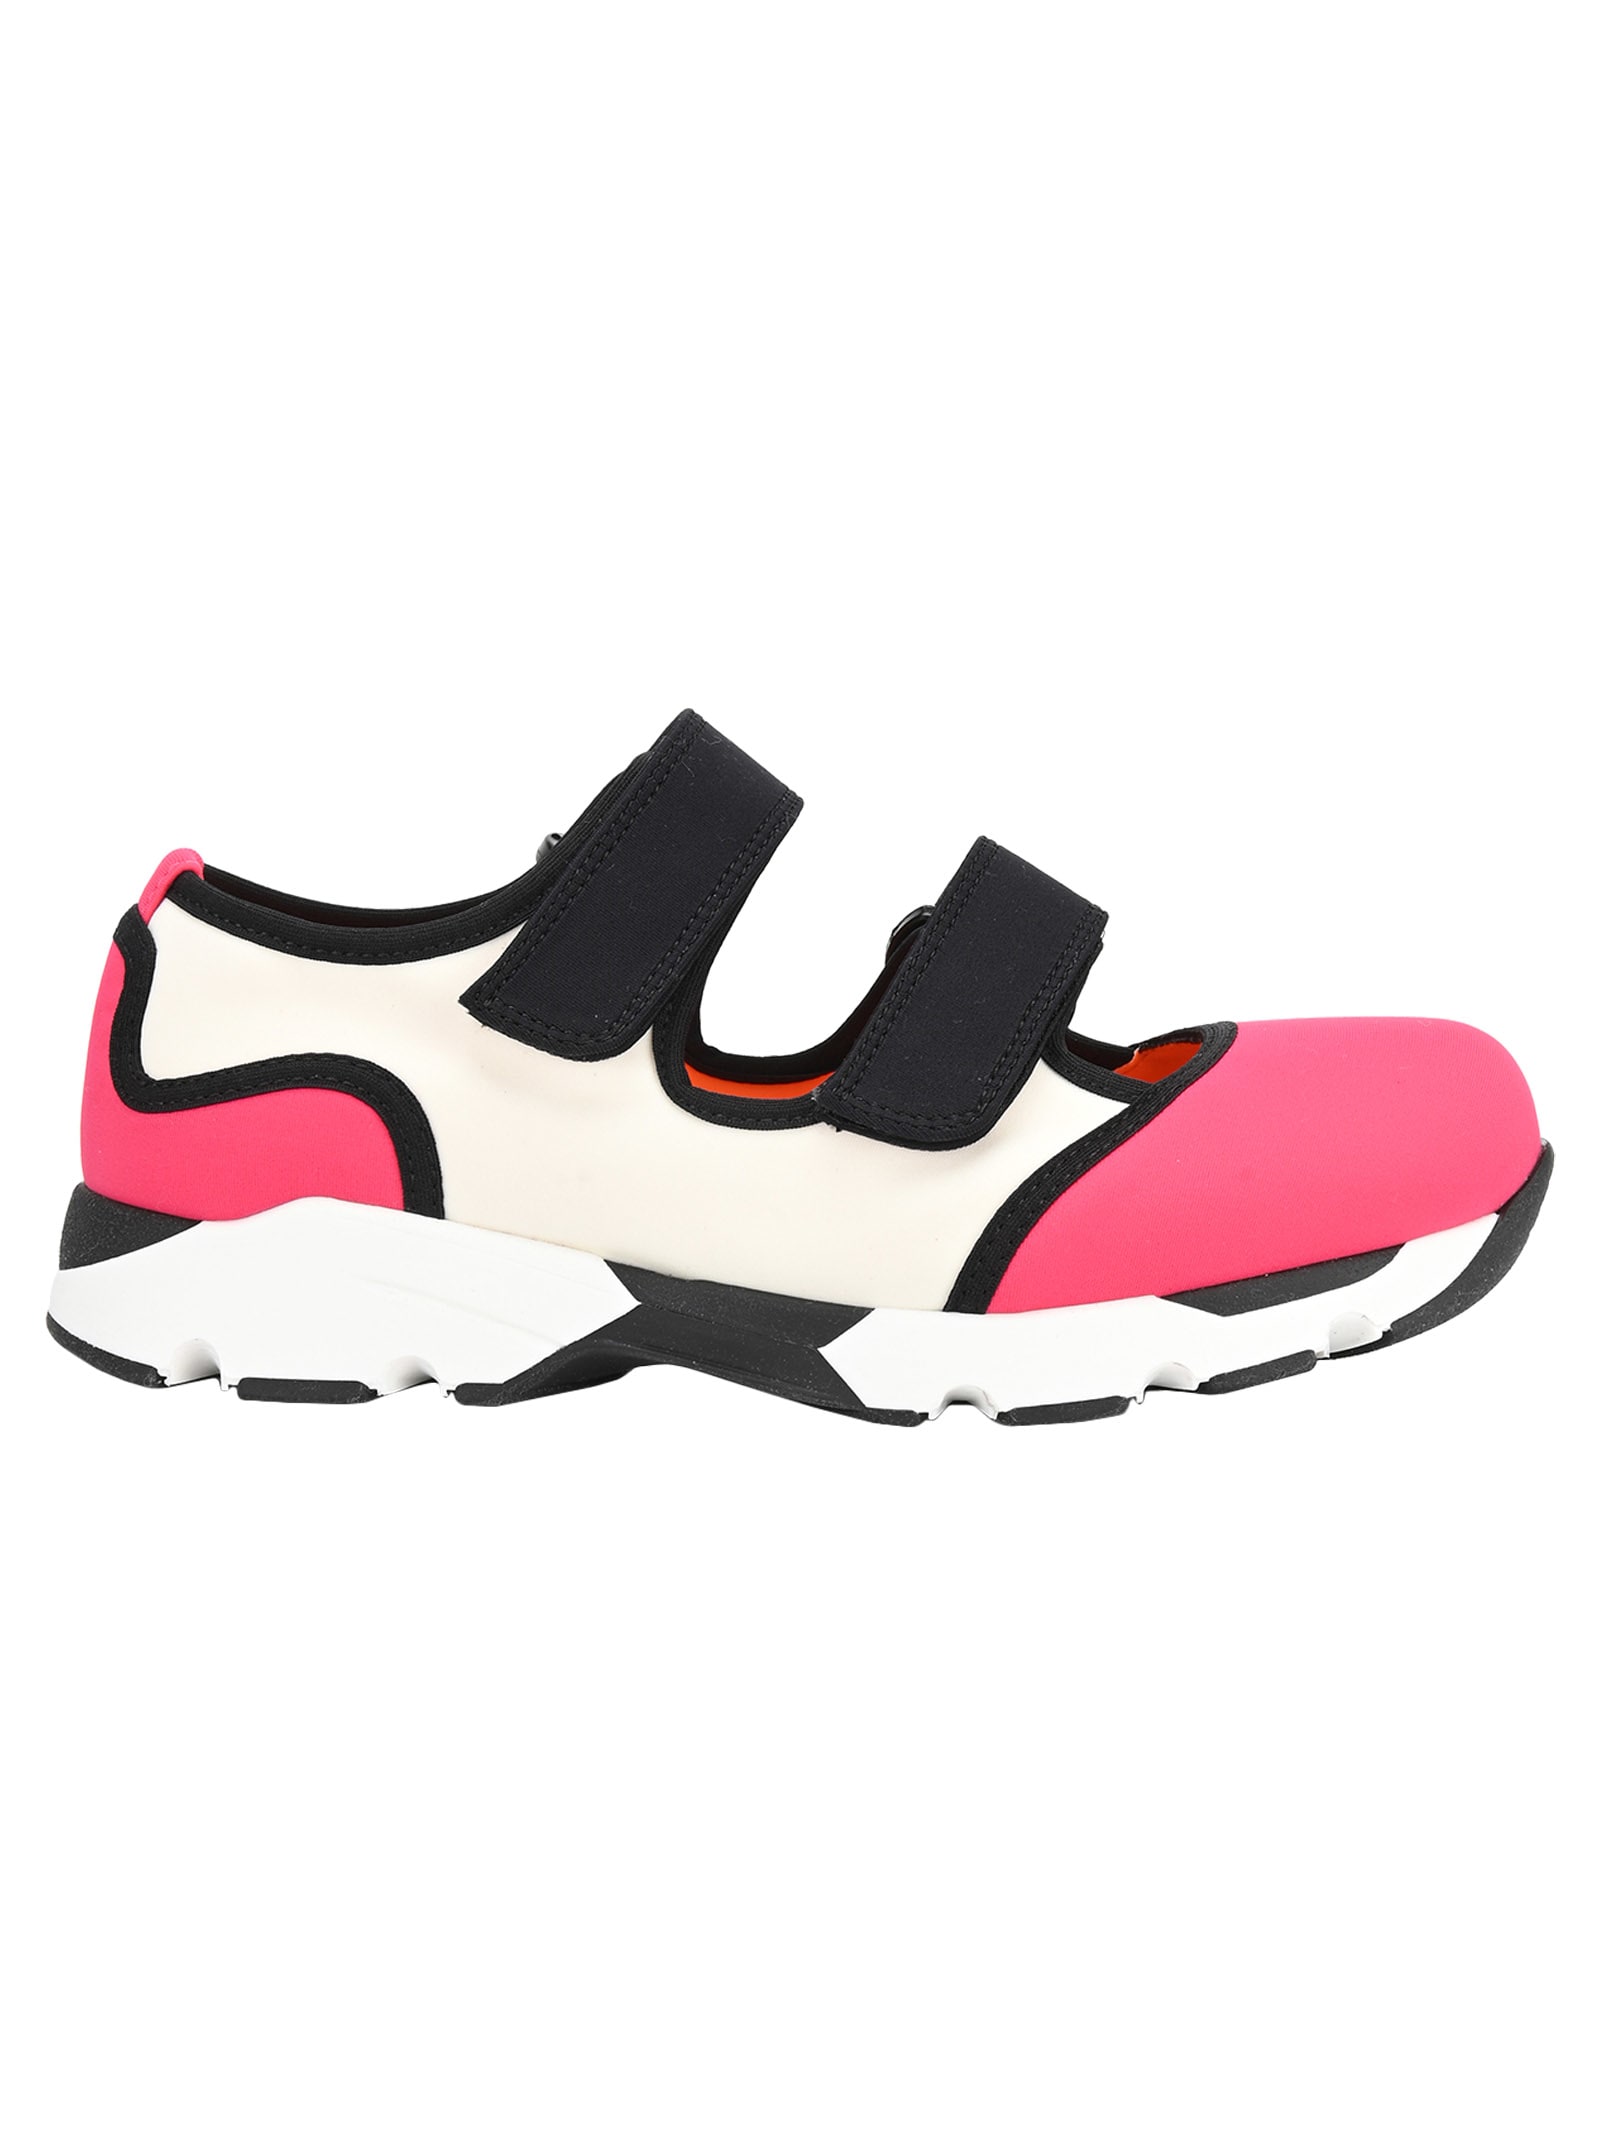 Marni Technical Fabric Sneakers With Strap Closures